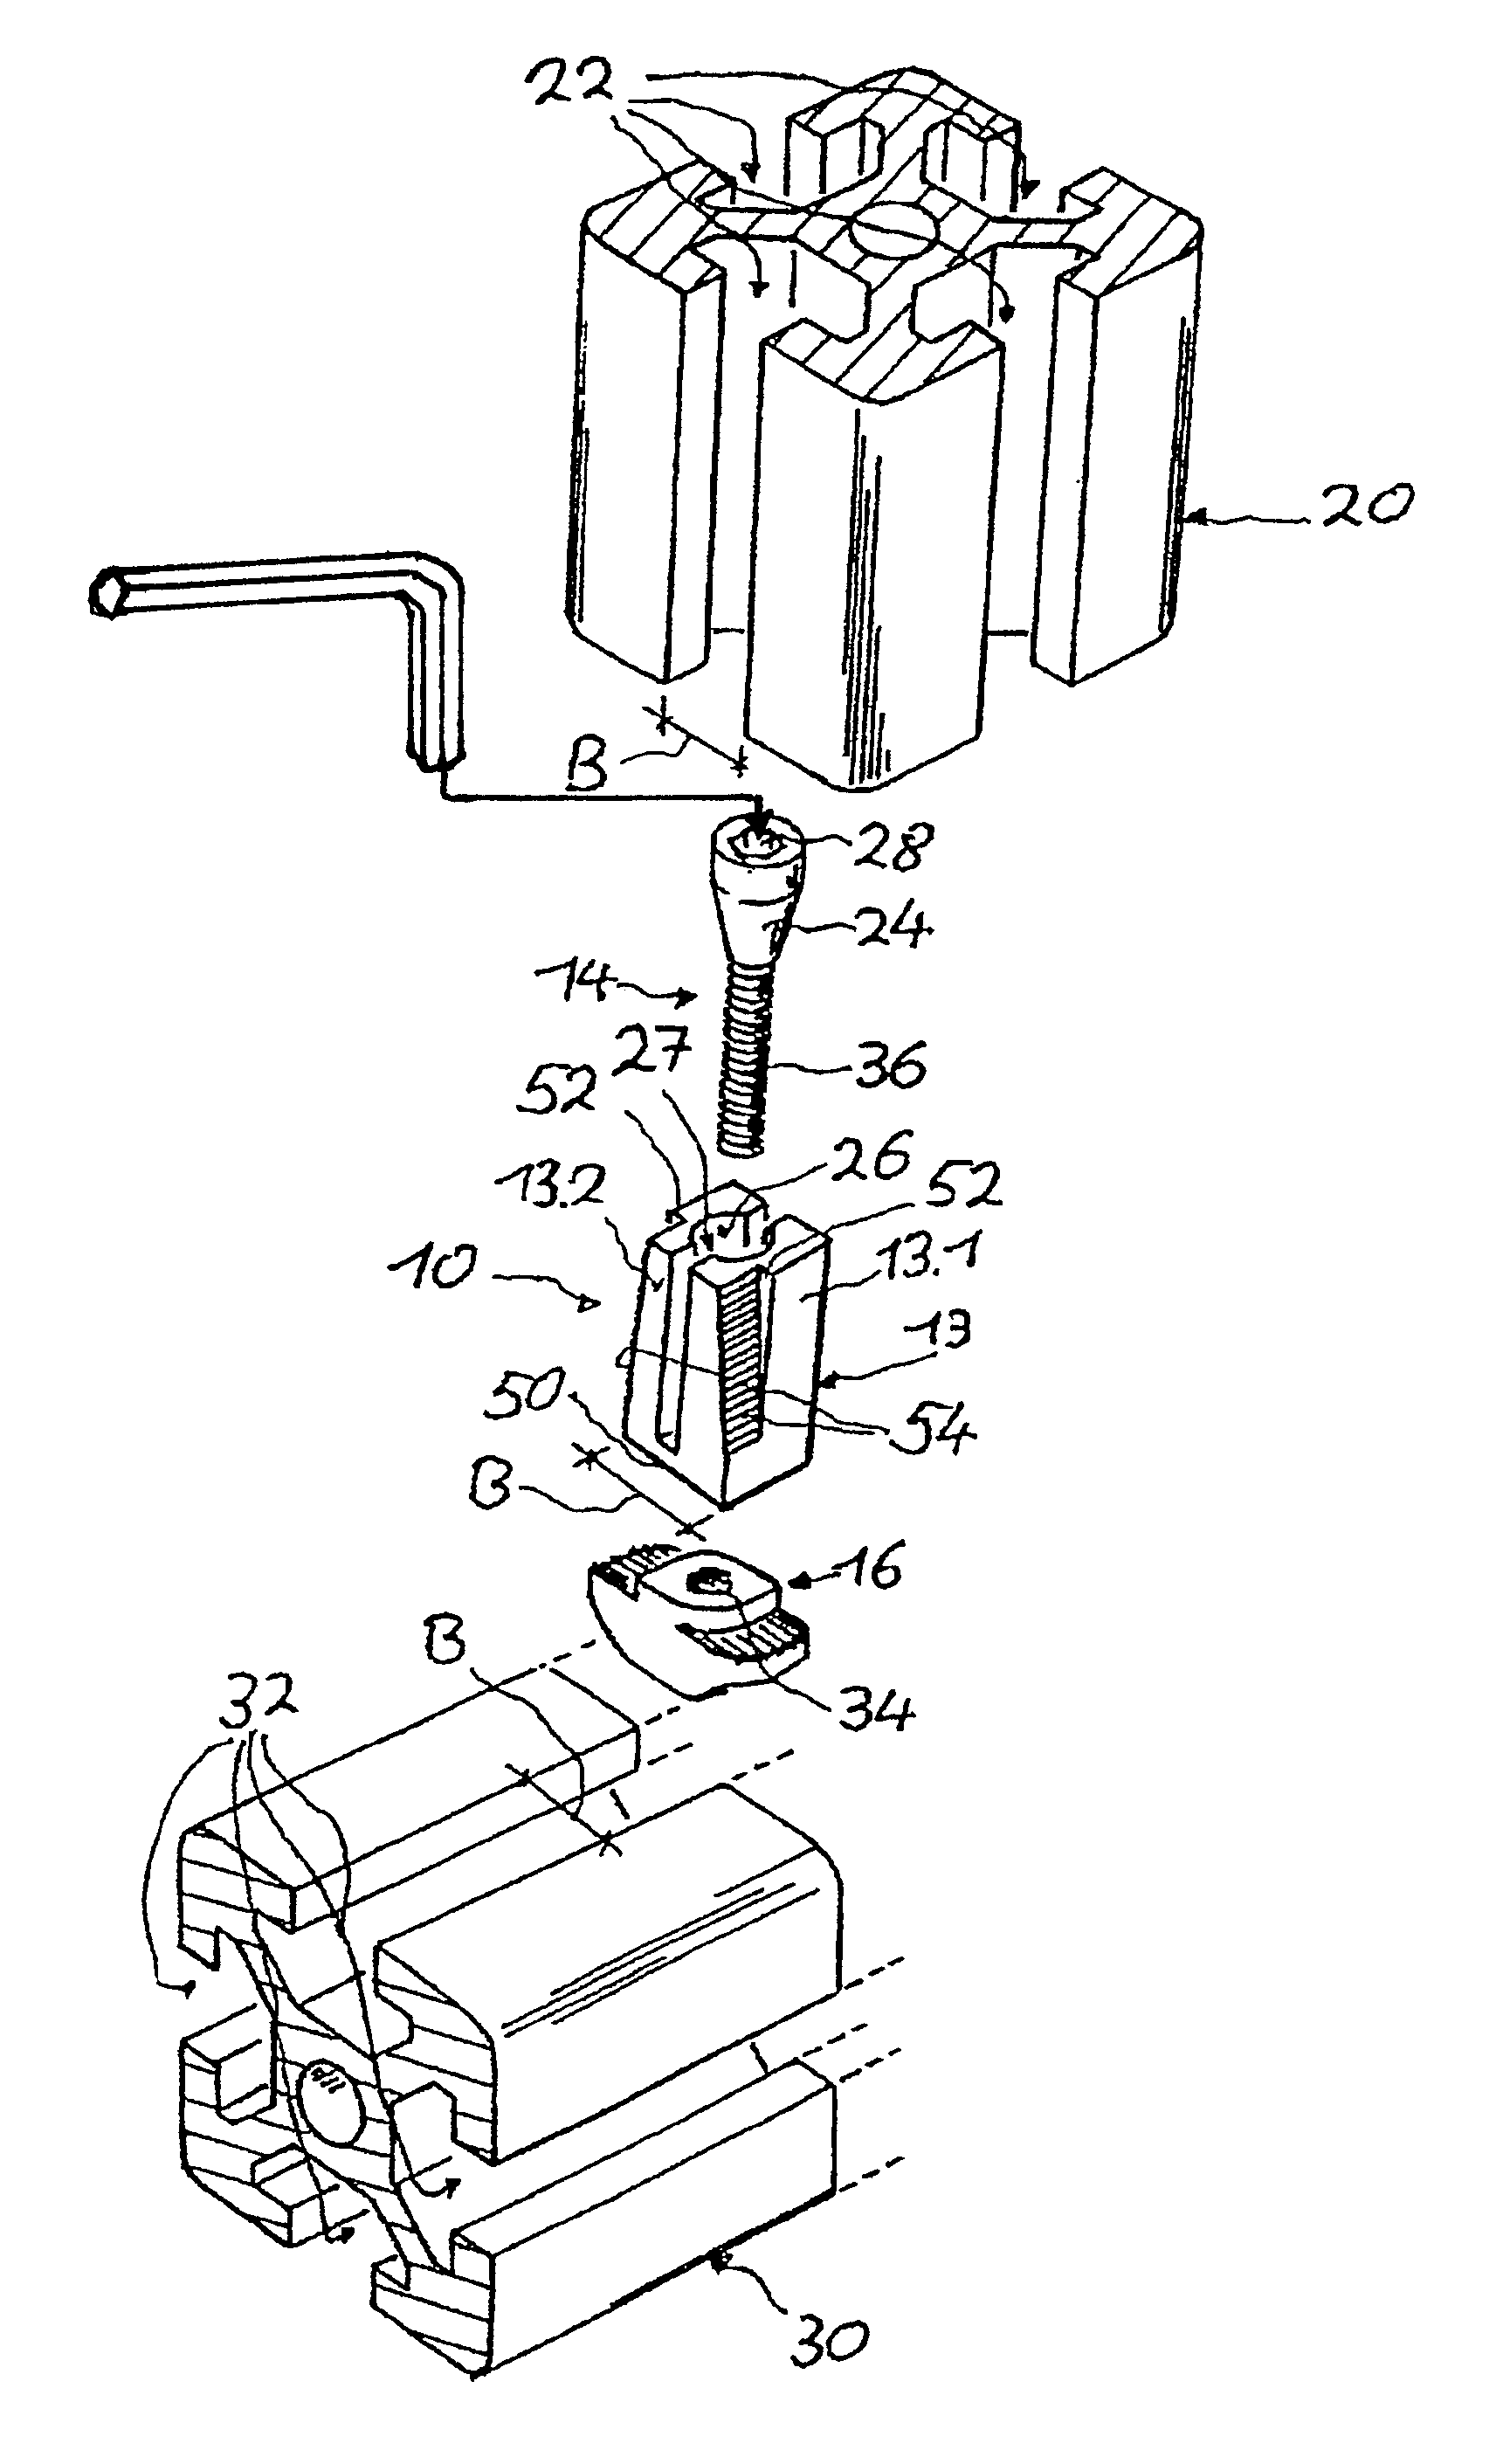 Profile-connecting device